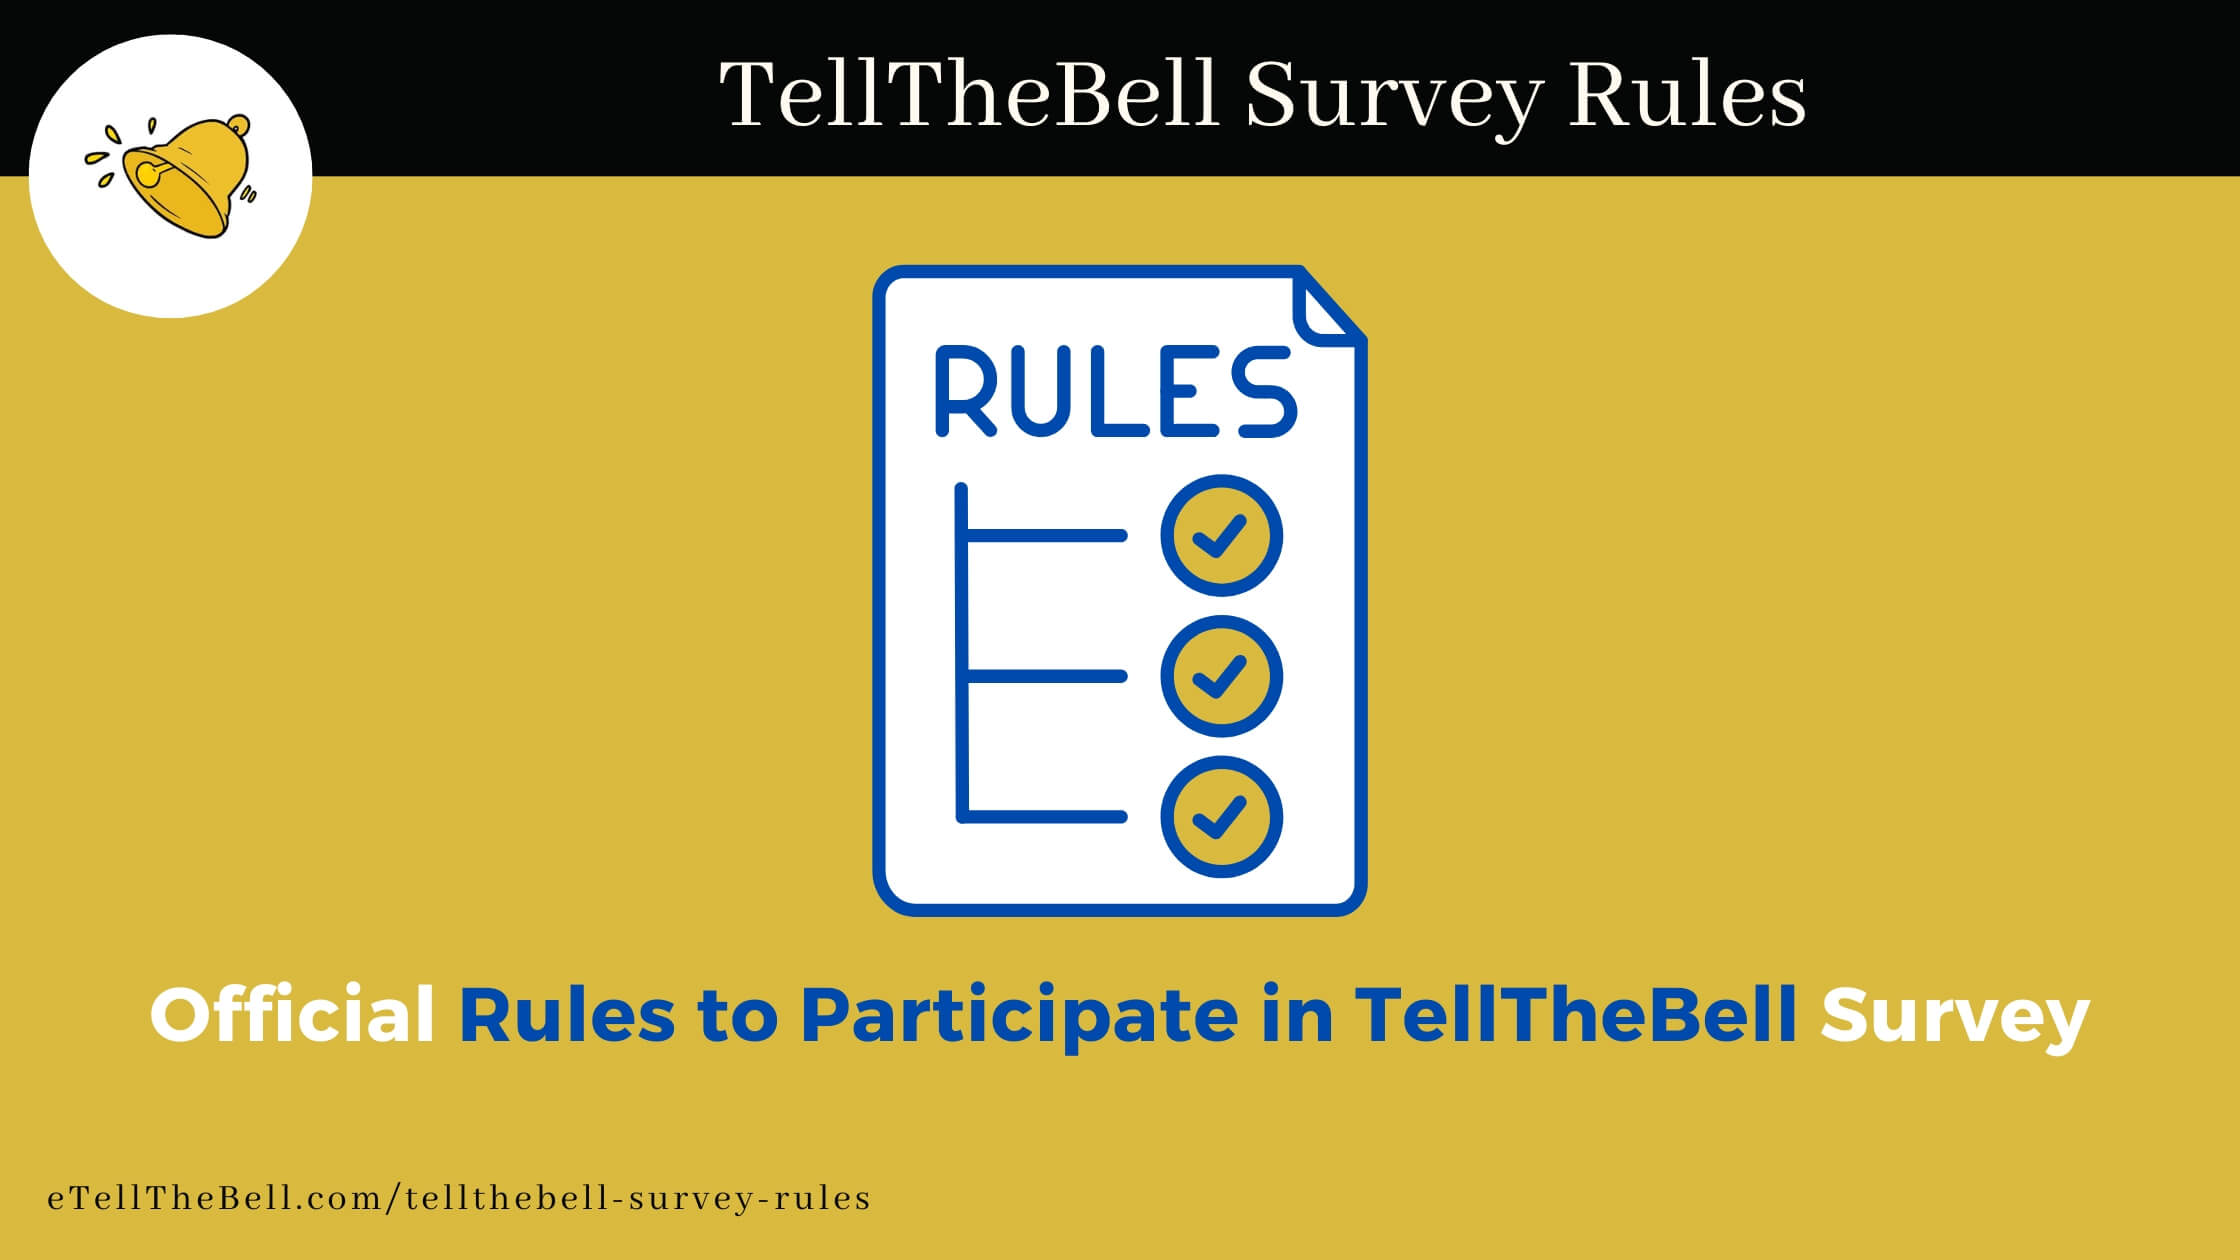 Official Rules to Participate in TellTheBell Survey